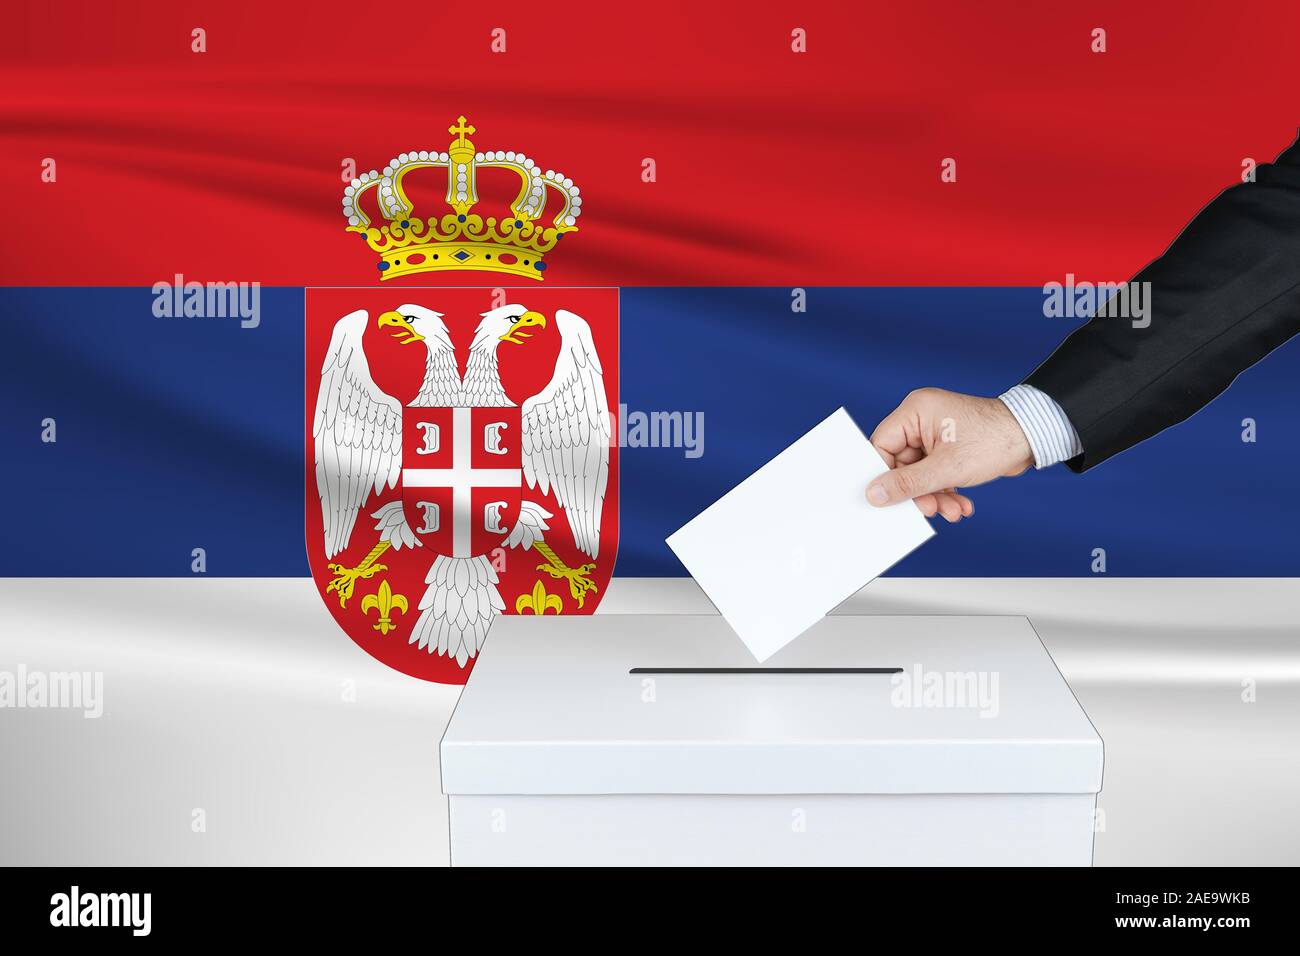 Election in Serbia. The hand of man putting his vote in the ballot box. Waved Serbia flag on background. Stock Photo